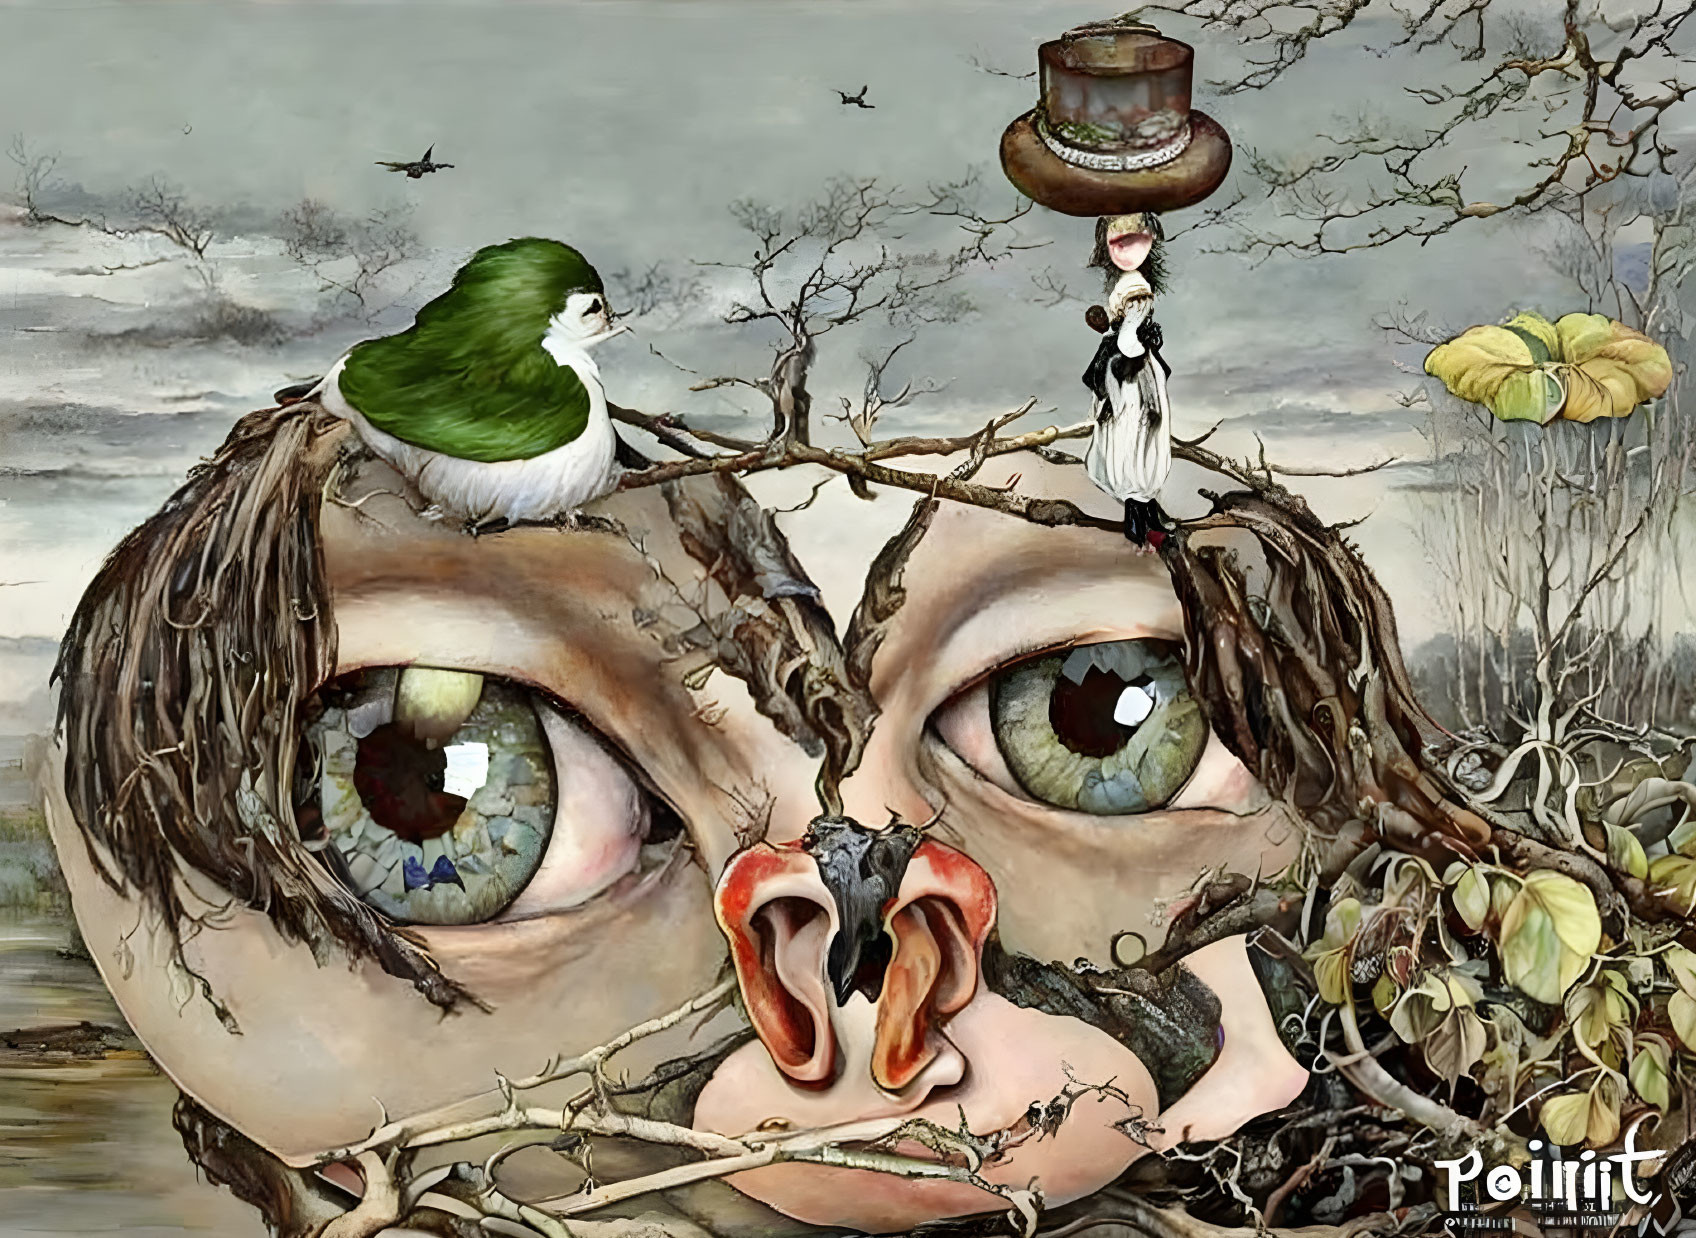 Surreal Artwork: Giant Eyes, Woman on Top Hat, Birds, Frog